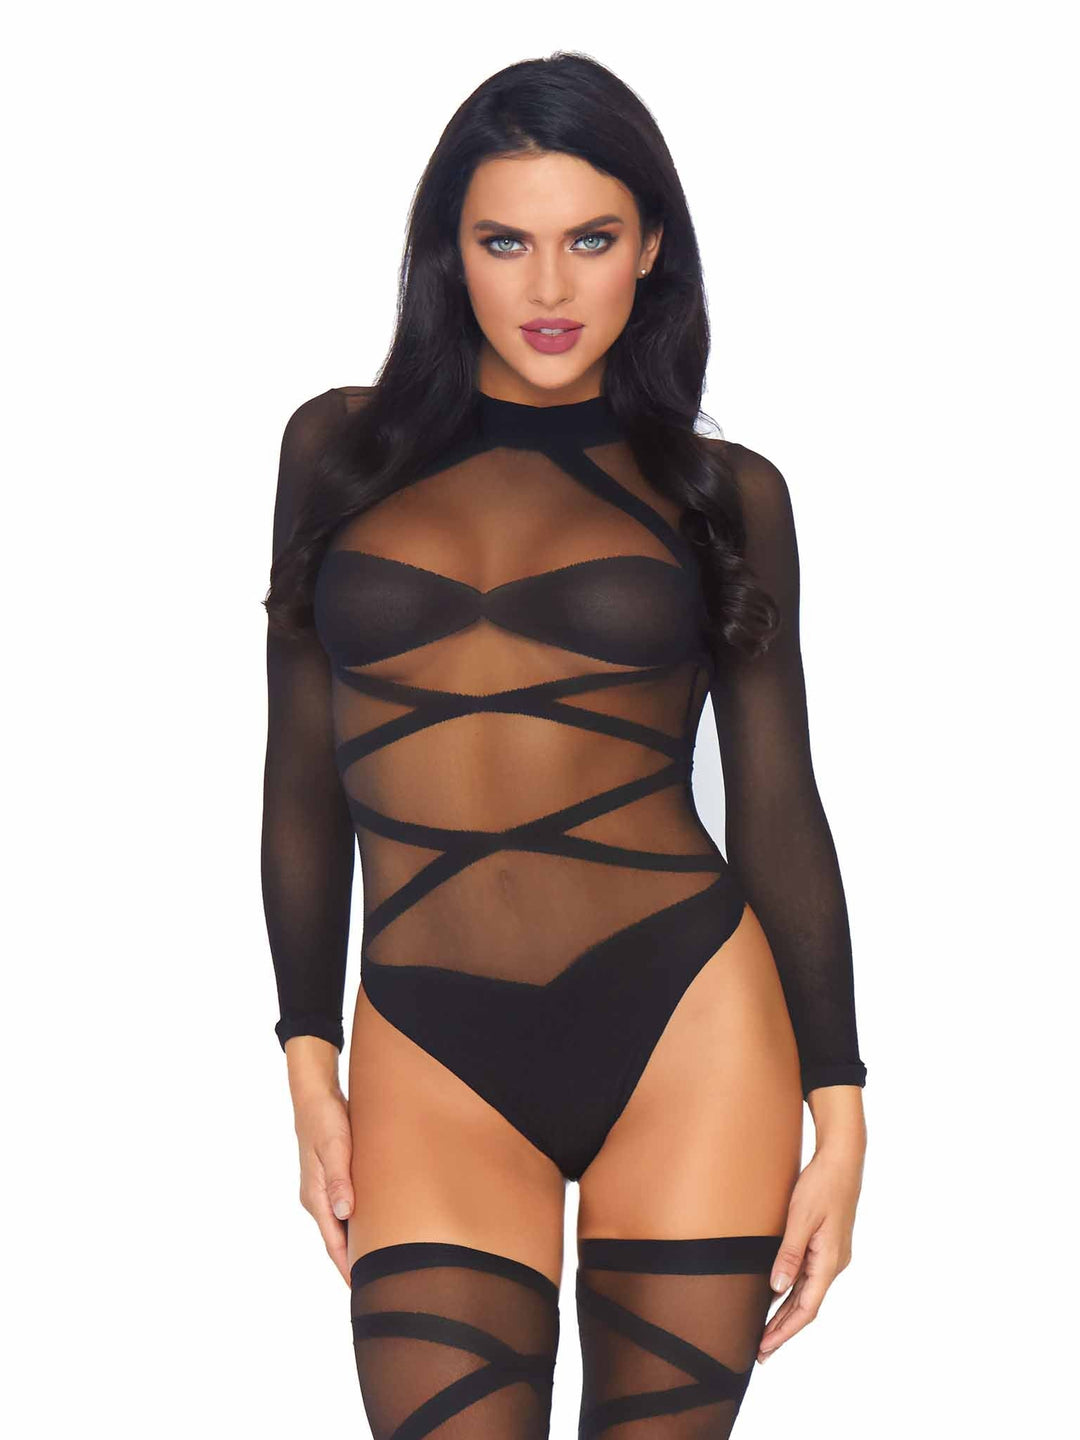 Close up image of the Sheer Criss Cross Bodysuit and Thigh High Set.